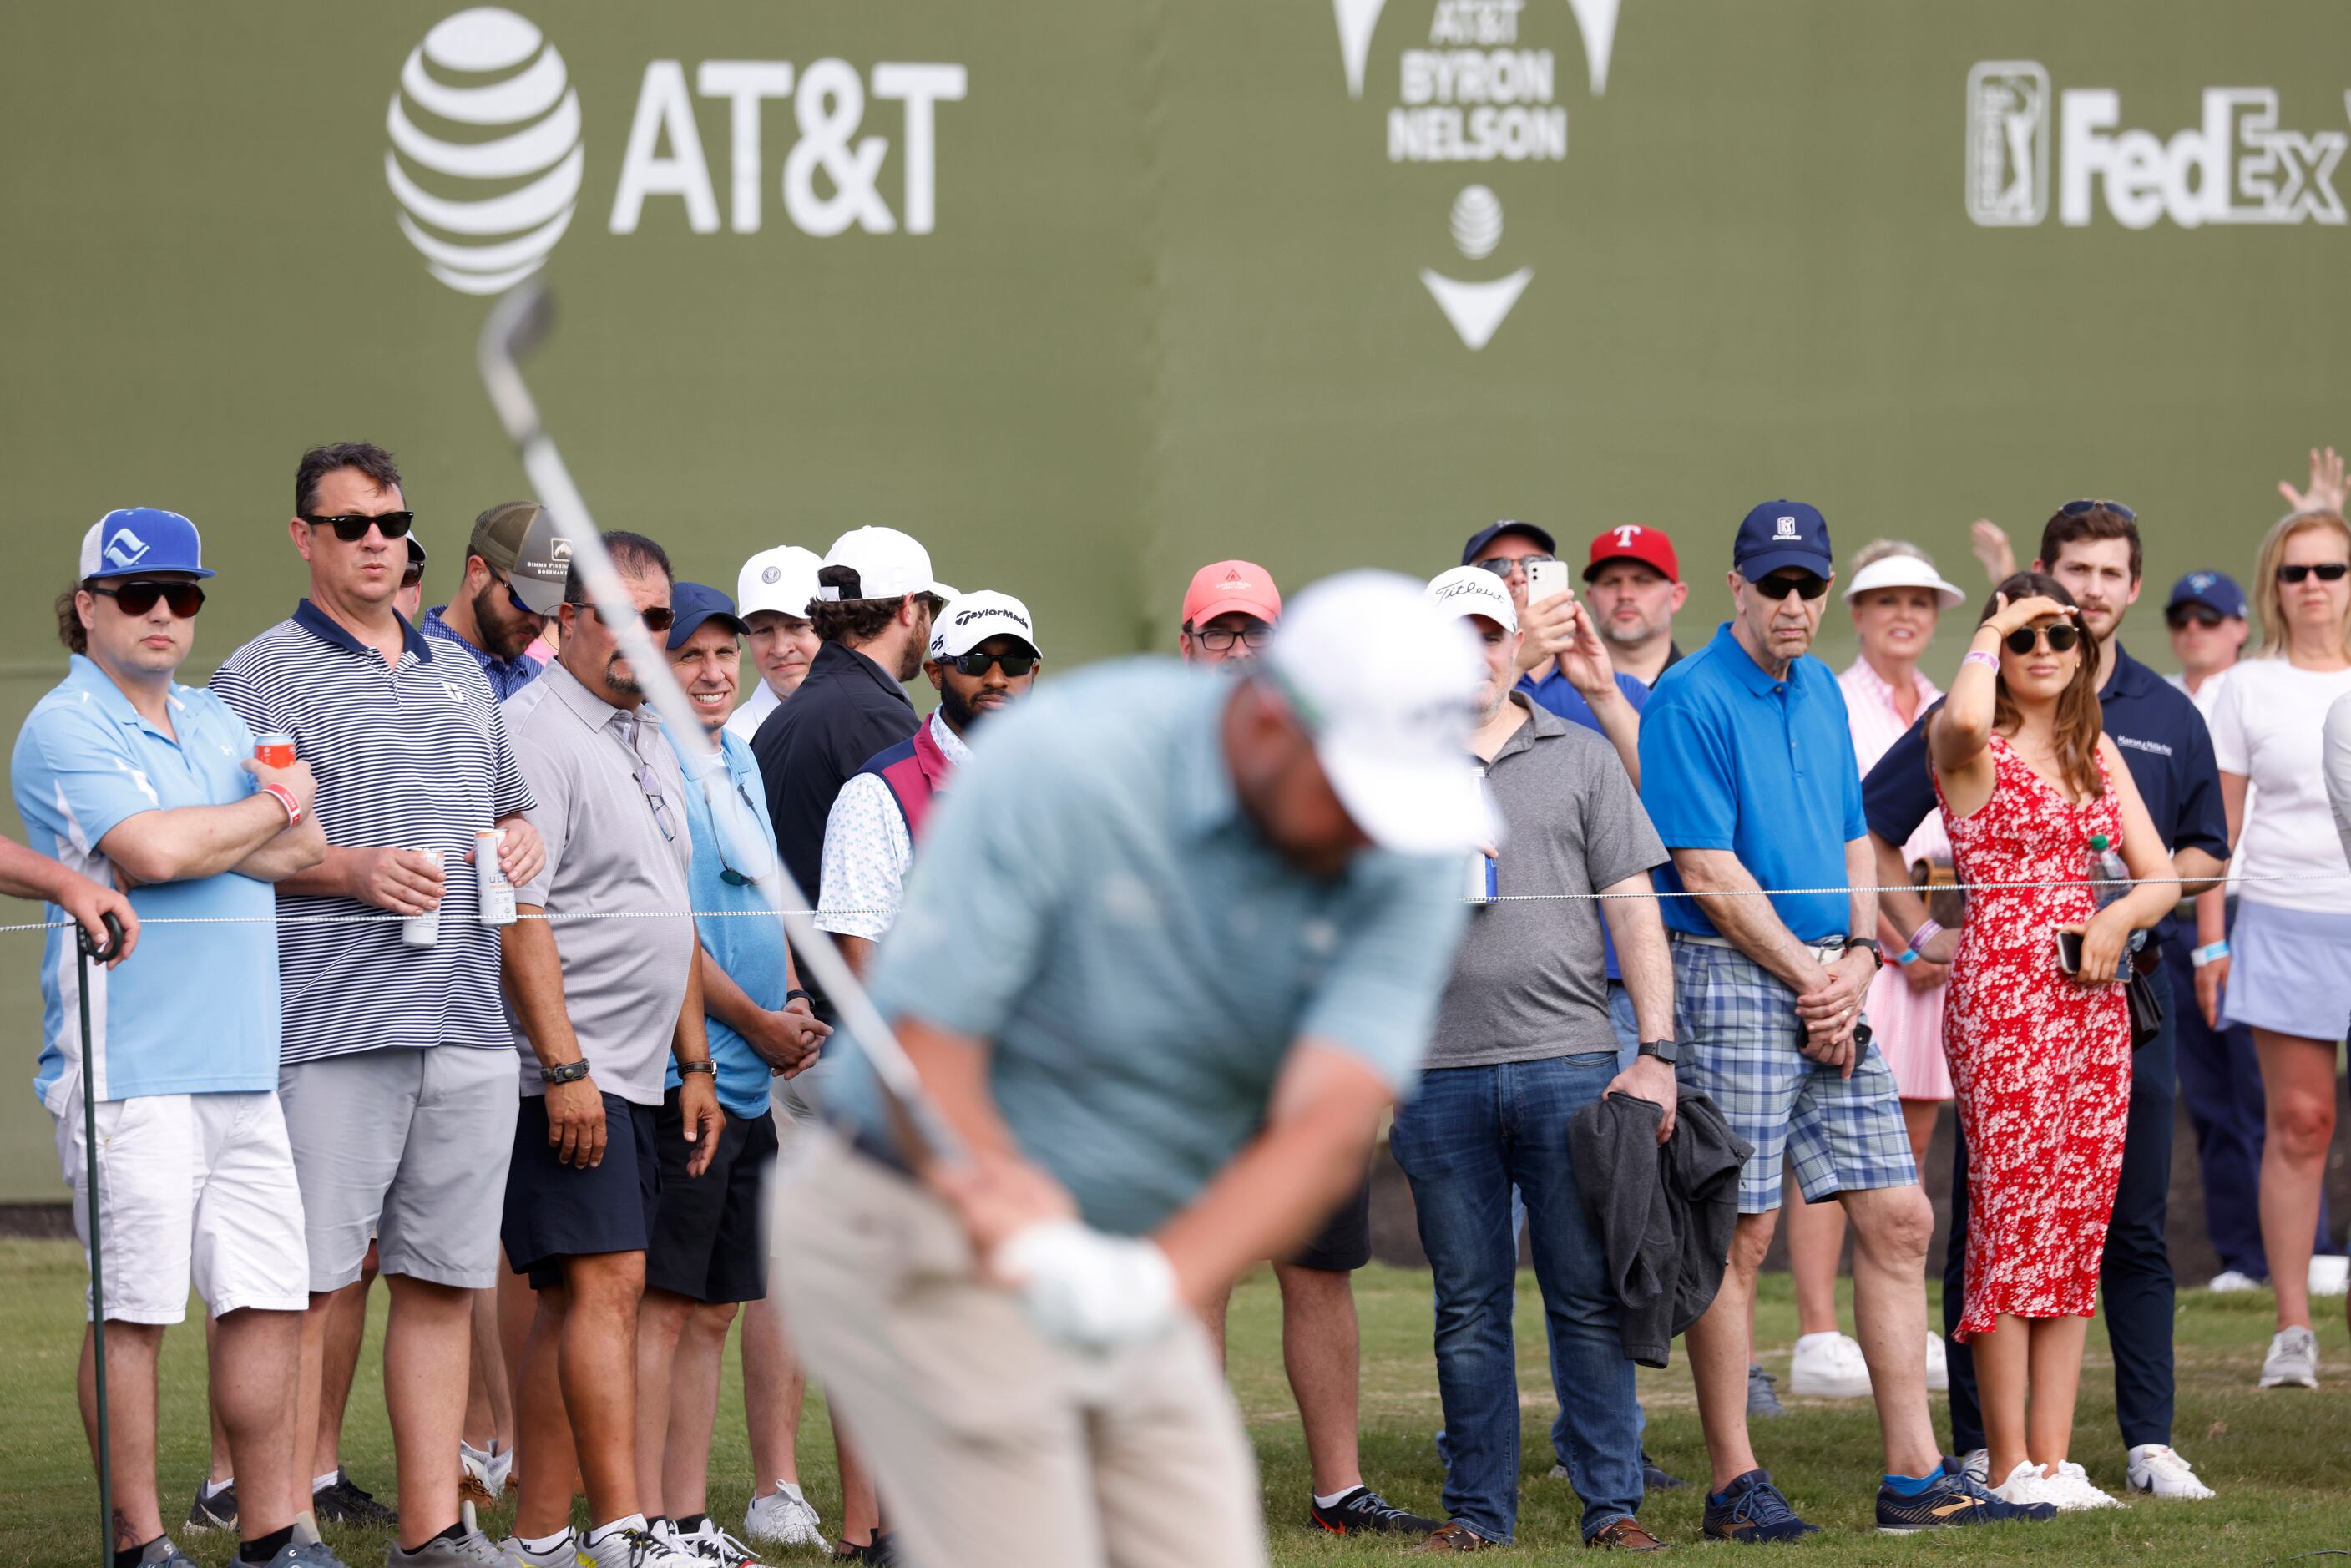 Fans watch as Marc Leishman tees off on the 17th hole during round 2 of the AT&T Byron...